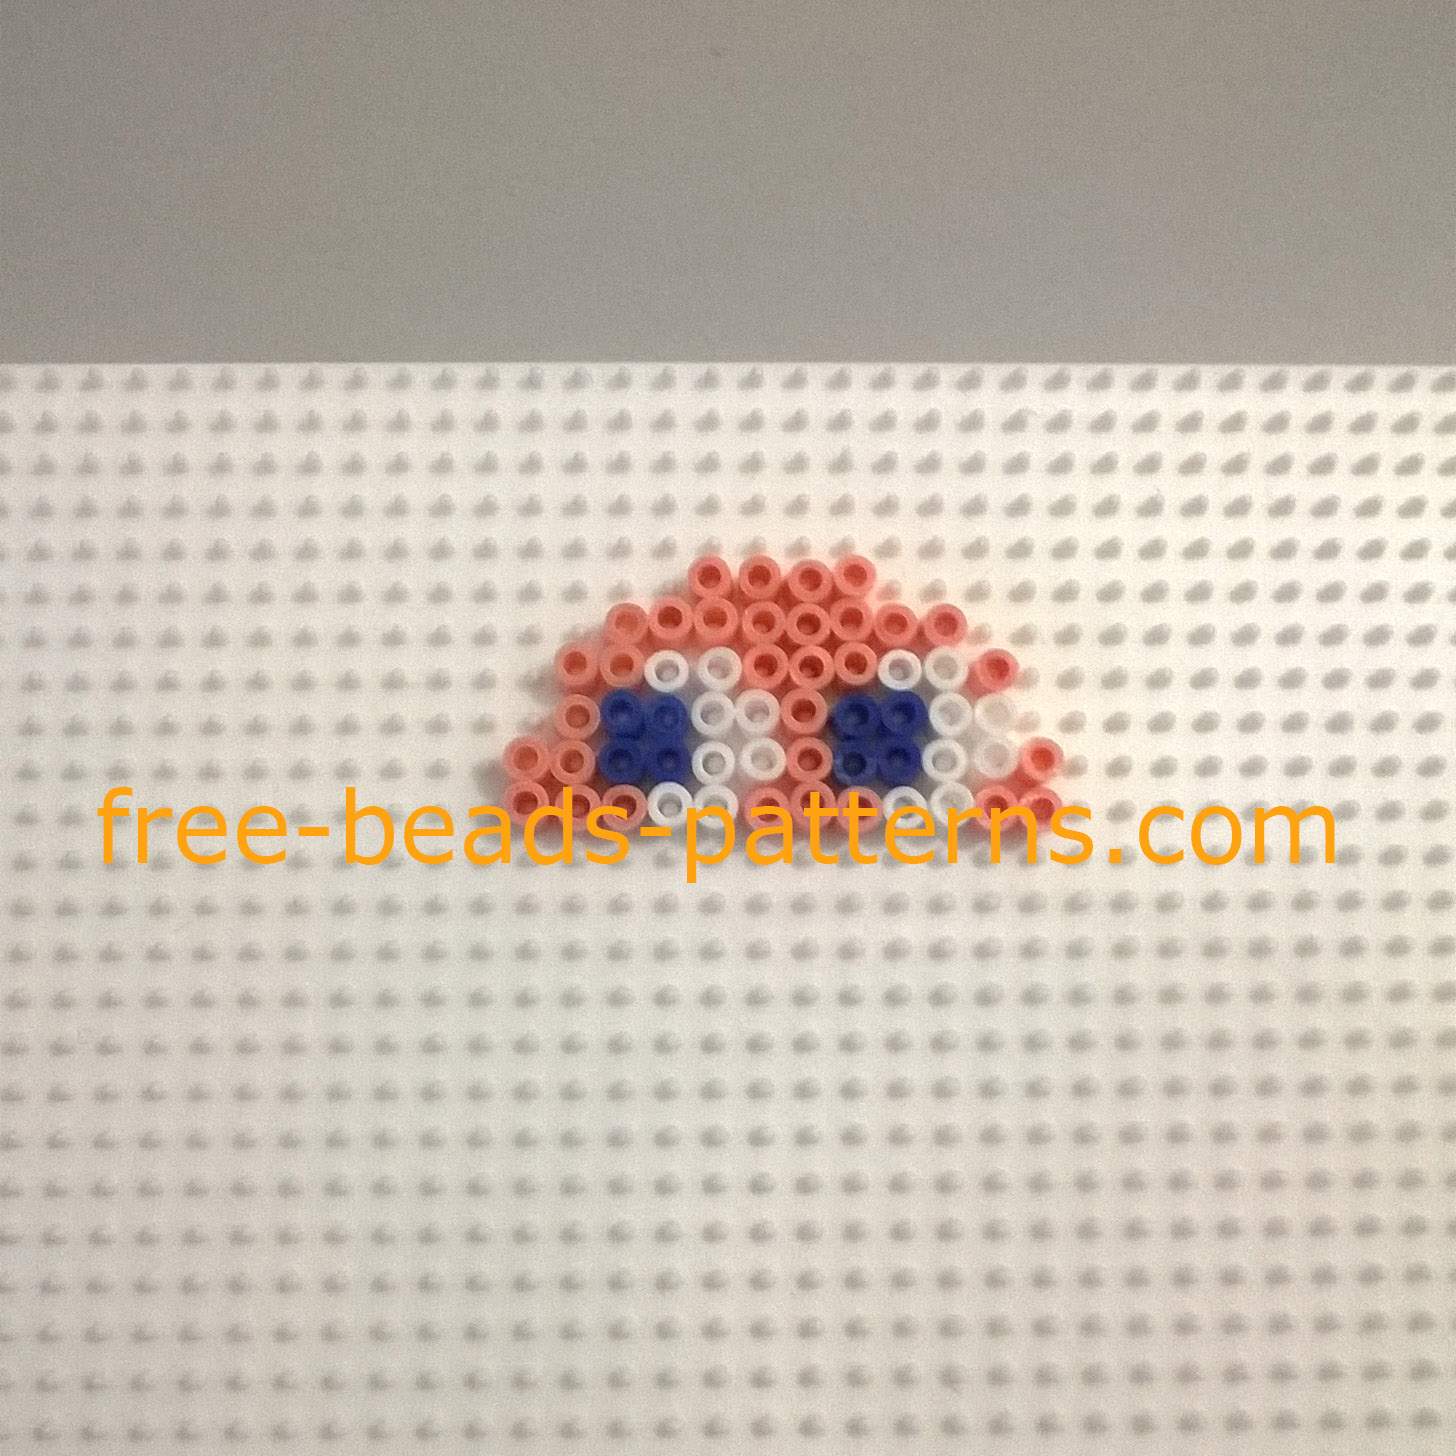 Pacman enemy Pinky work photo fuse beads author site user Bill (2)